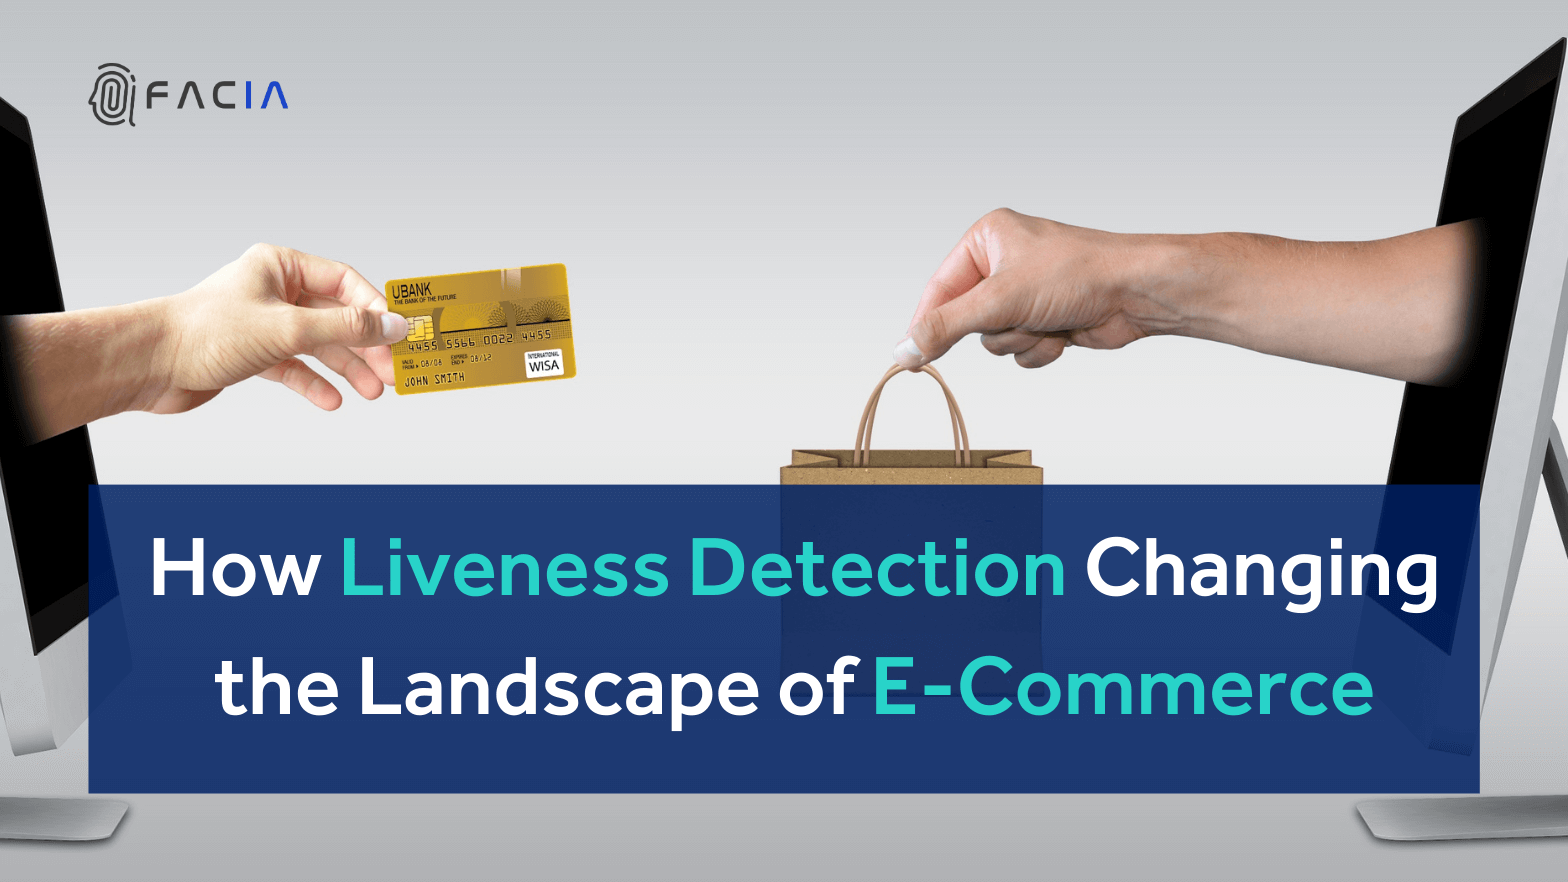 How Liveness Detection Changing the Landscape of E-Commerce